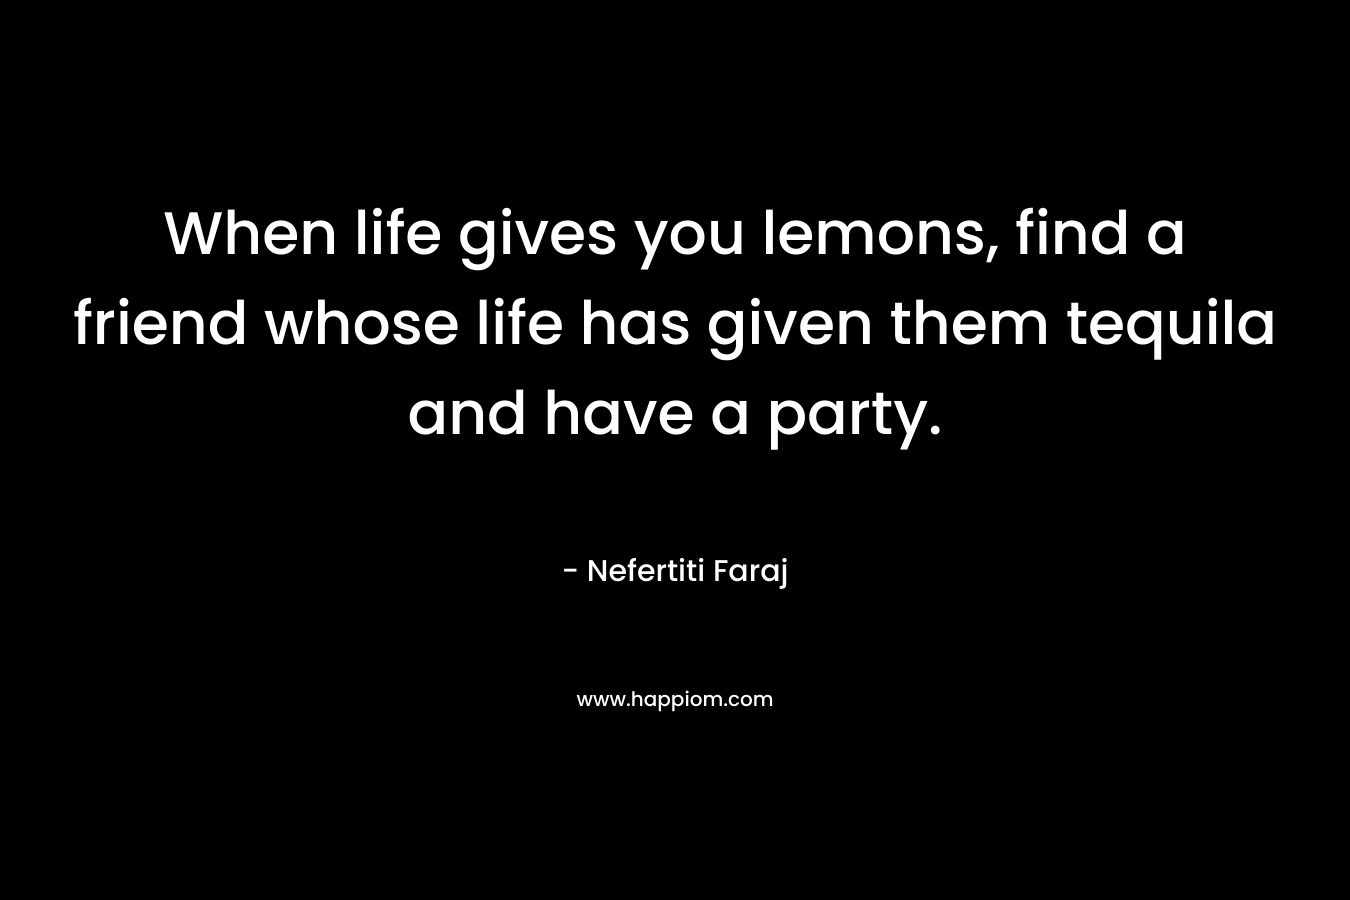 When life gives you lemons, find a friend whose life has given them tequila and have a party. – Nefertiti Faraj